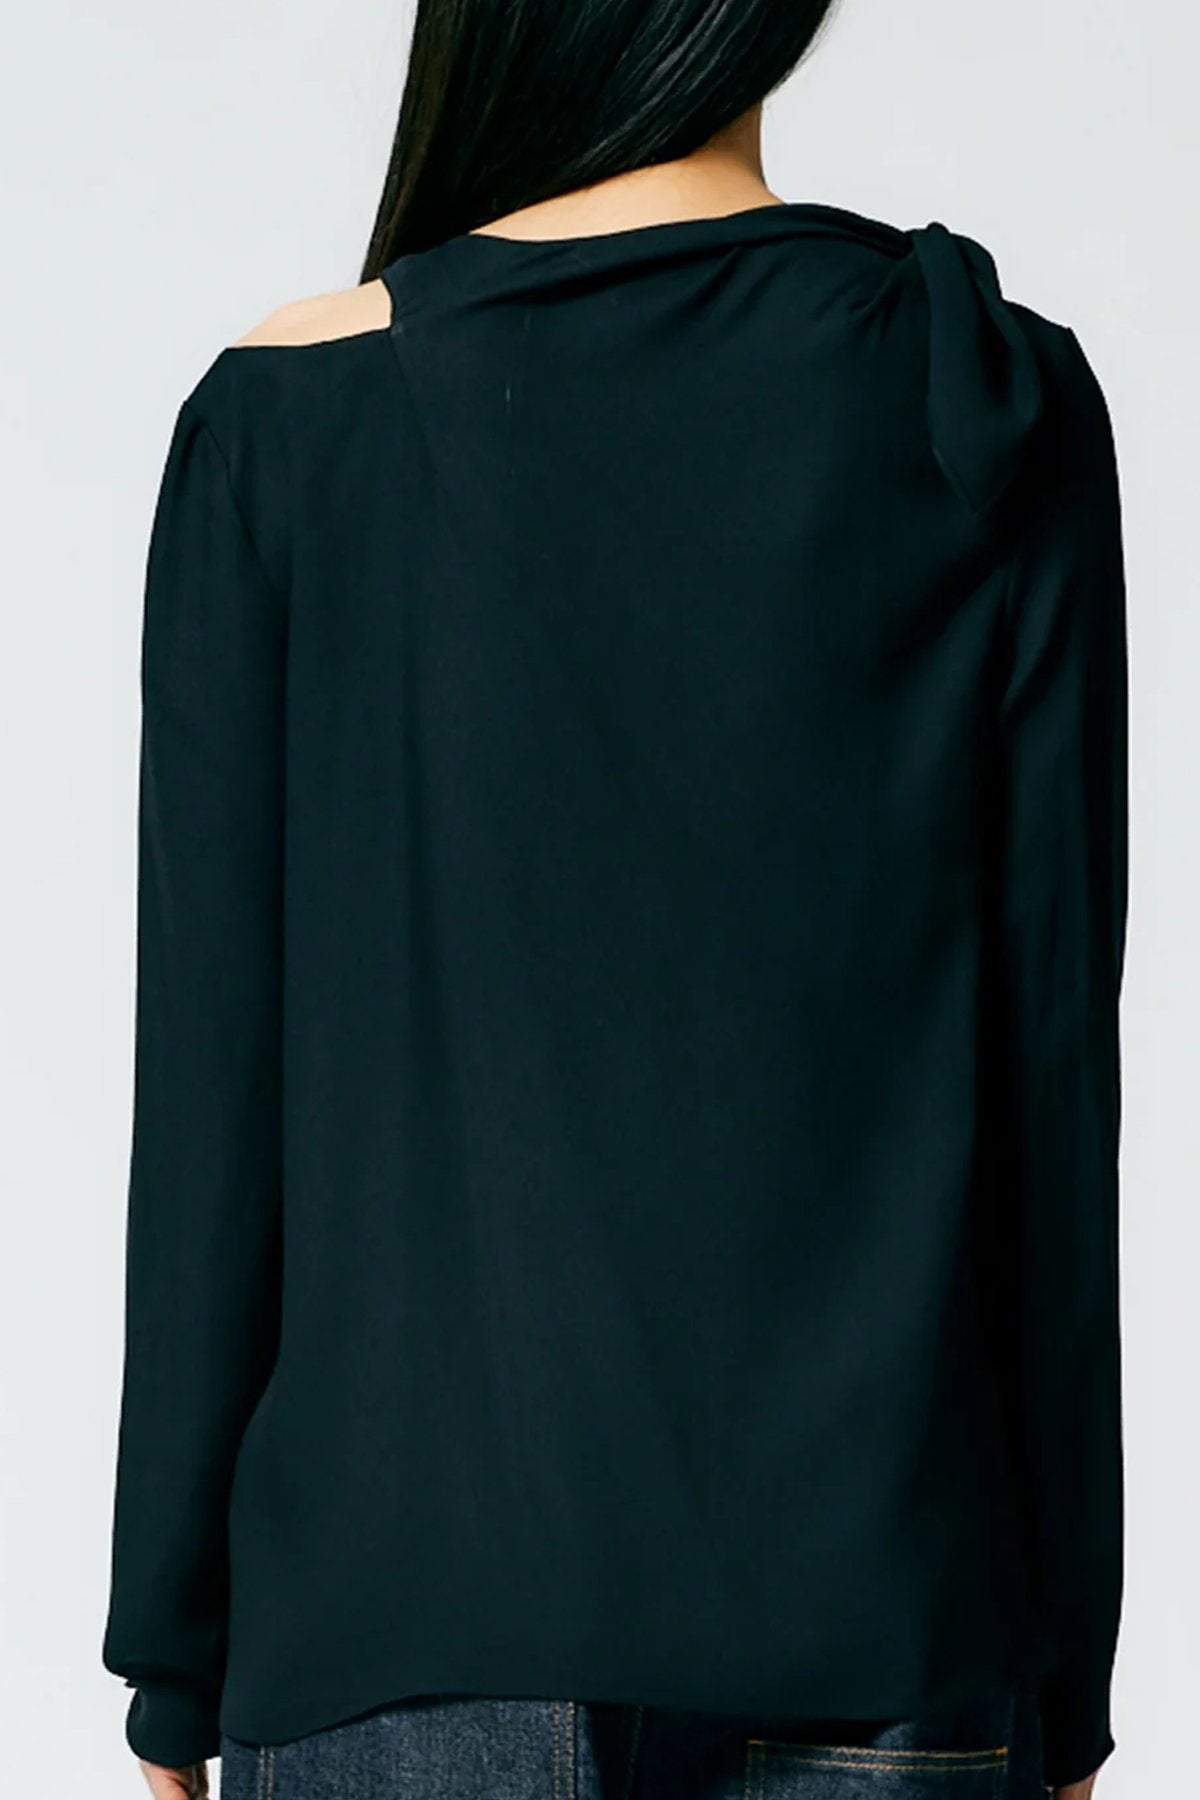 Feather Weight Eco Crepe Benedict Top in Black - shop-olivia.com